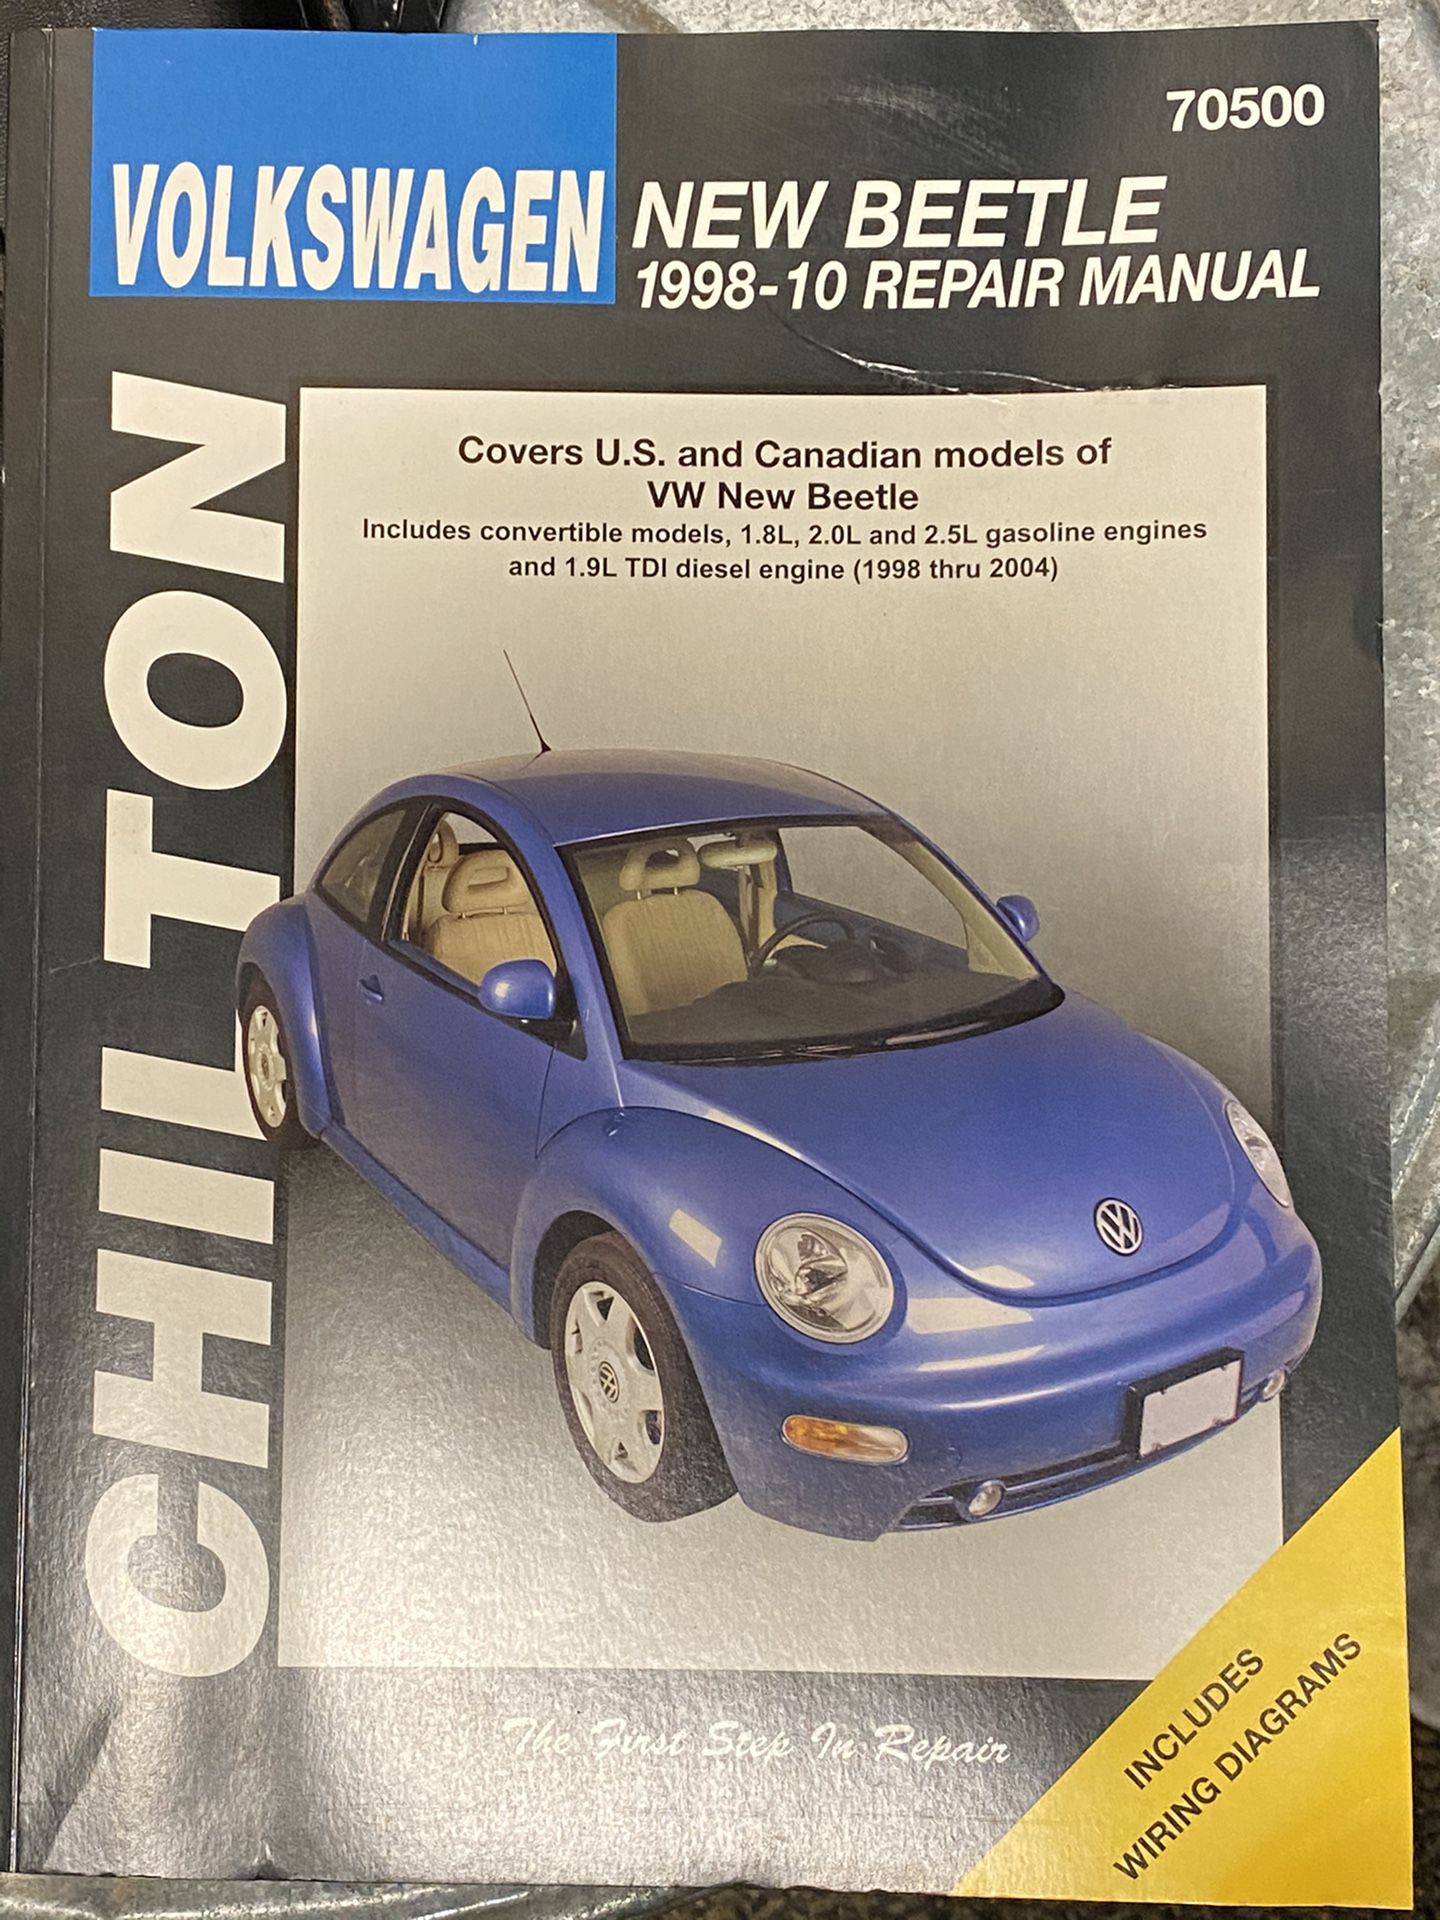 2006 Beetle chilltons repair manual and head light assembly